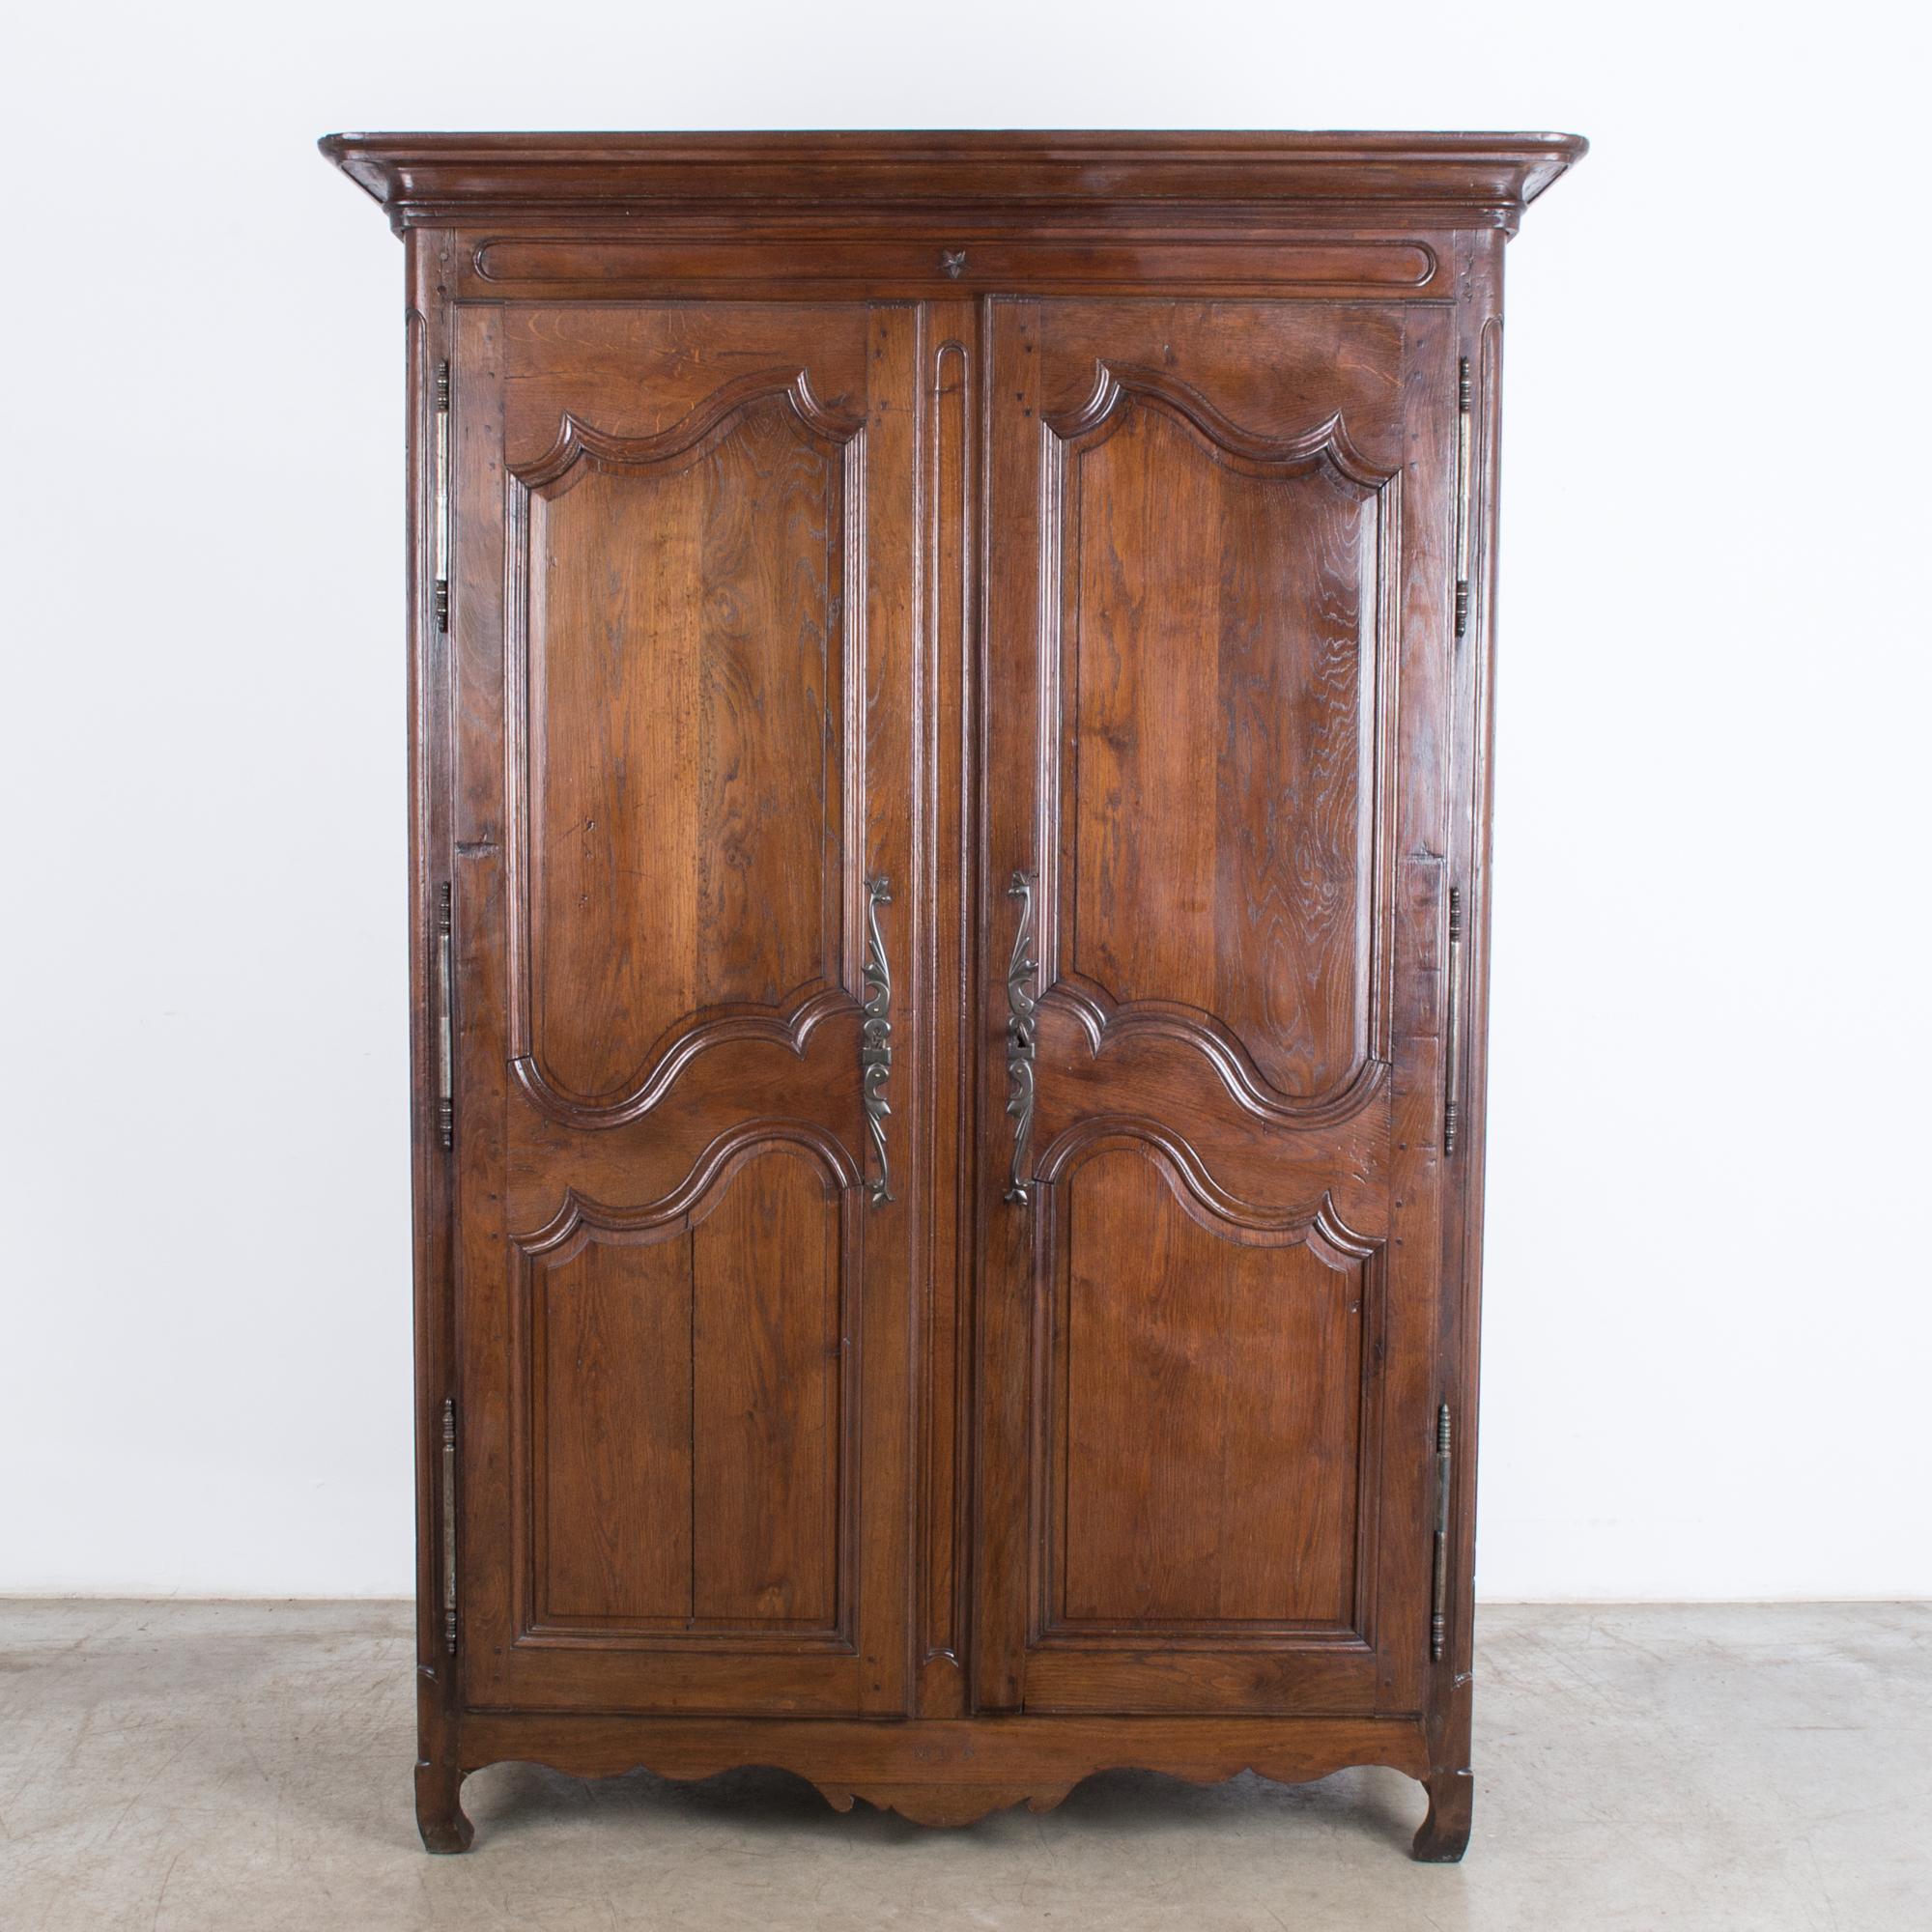 This rococo armoire was made in France at the turn of the century. Full featured French provincial Classic, rich varnish, double doors with S-shaped curves, practical interior shelves, scalloped apron and charming pigeon-toed front feet, engraved